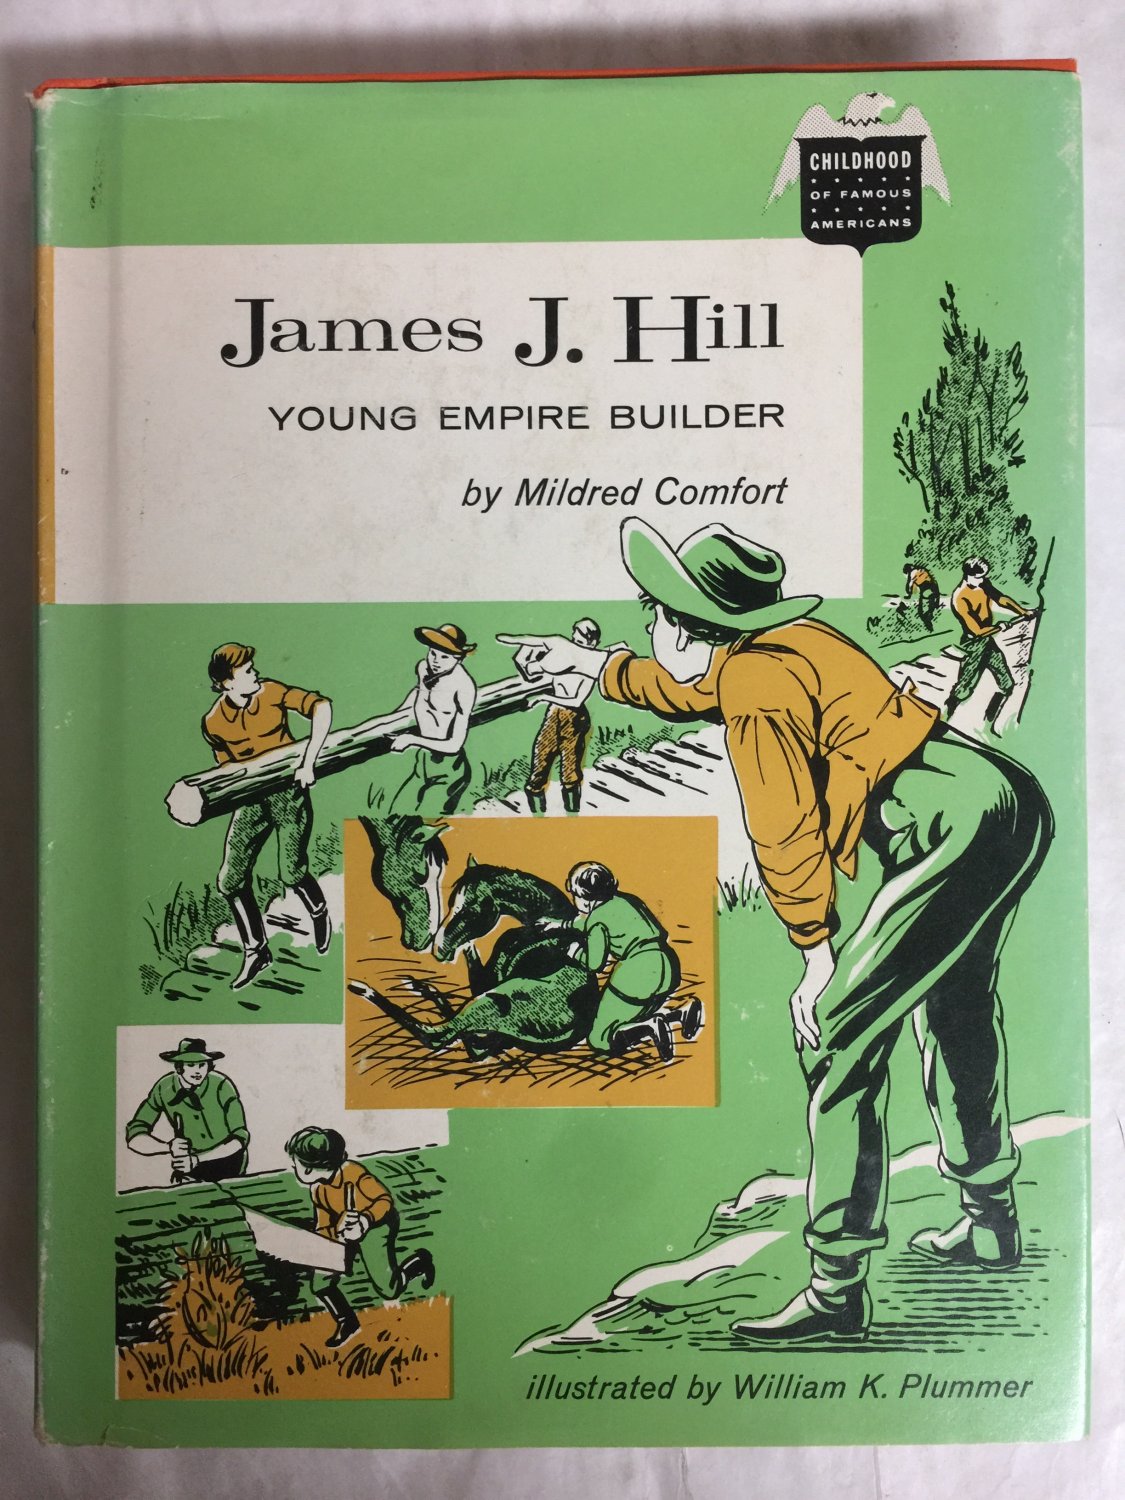 James J Hill, Young Empire Builder by Mildred Cpmfort